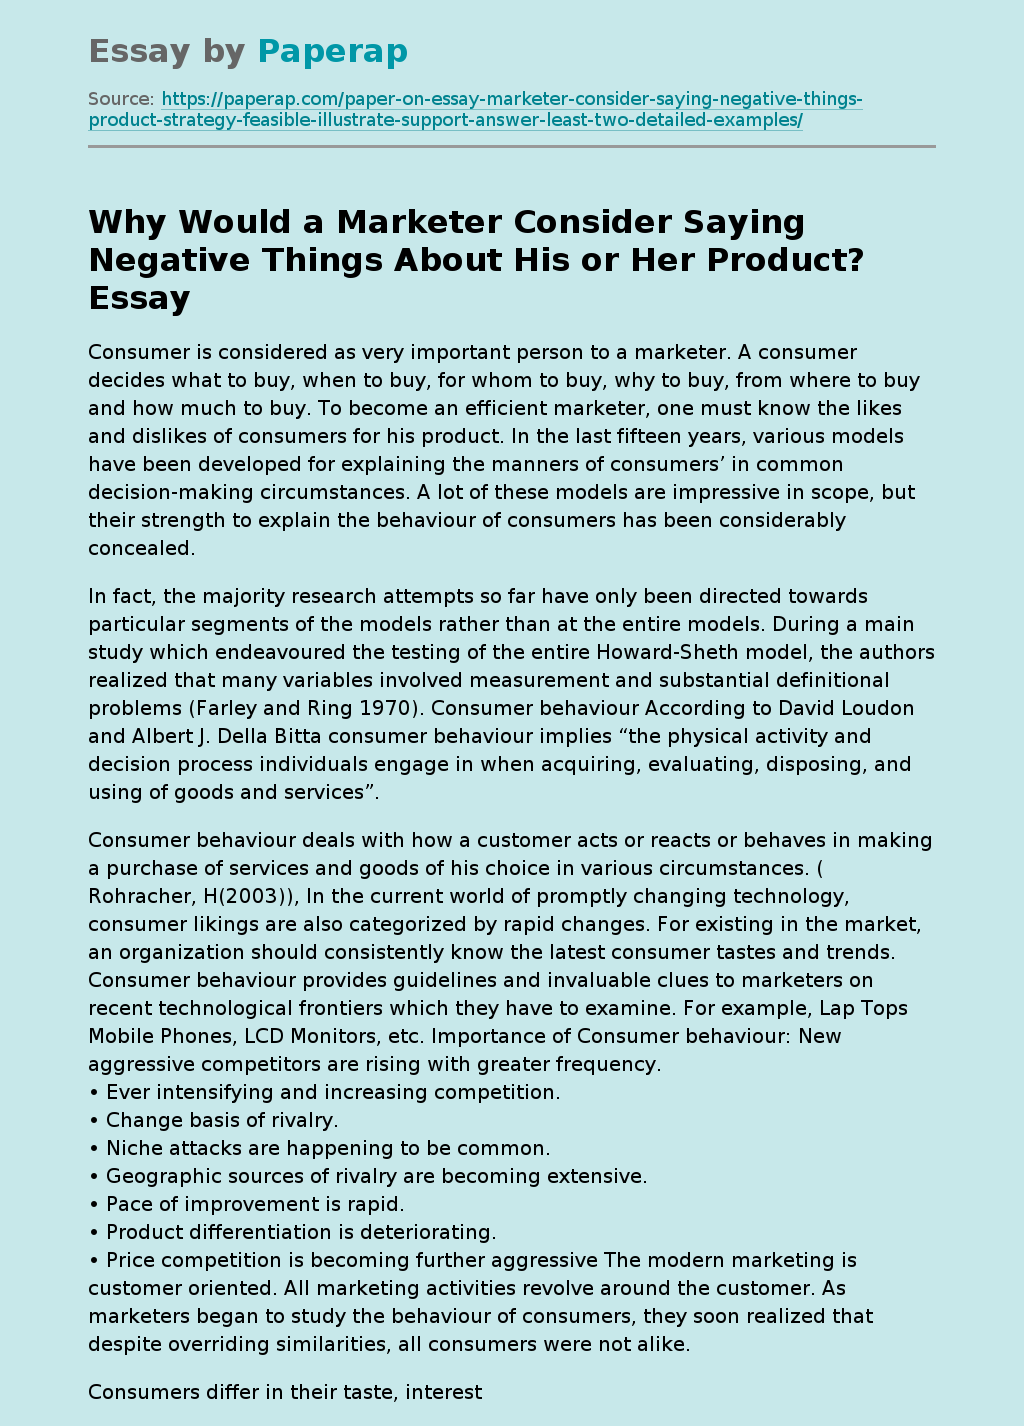 Why Would a Marketer Consider Saying Negative Things About His or Her Product?